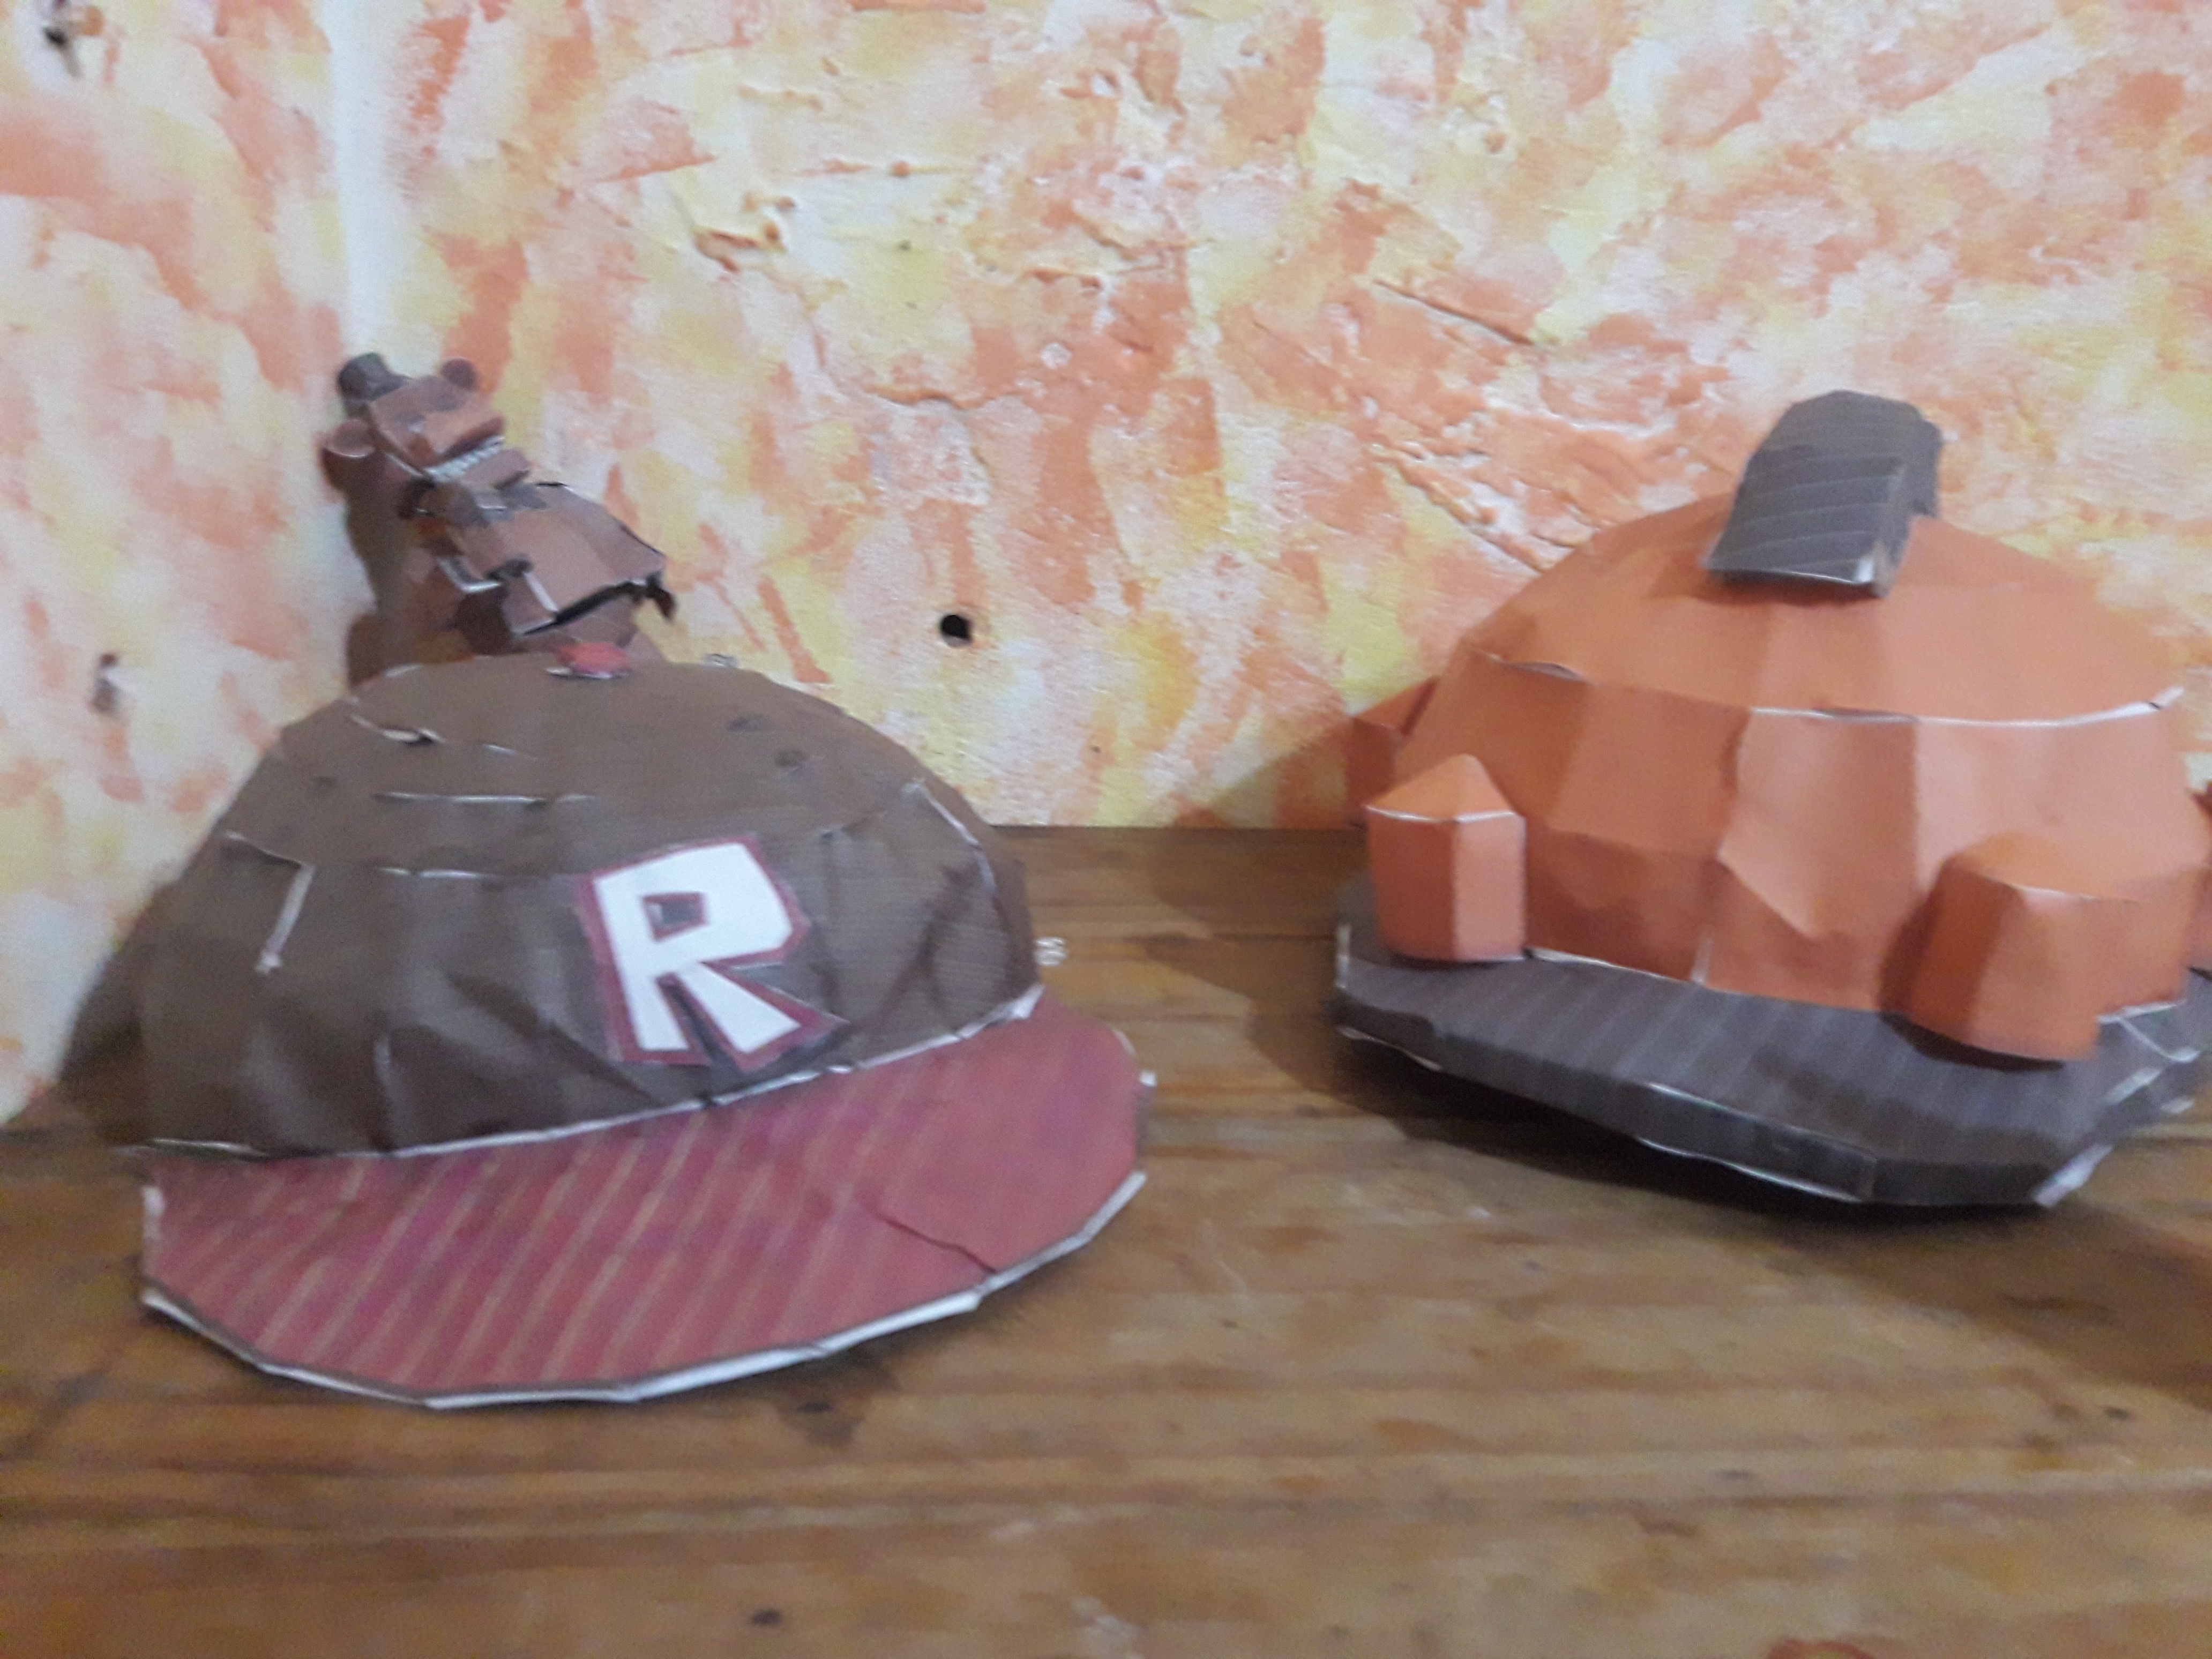 Tbc Hat And Roblox R Cap By Panastraluwu On Deviantart - roblox character papercraft roblox